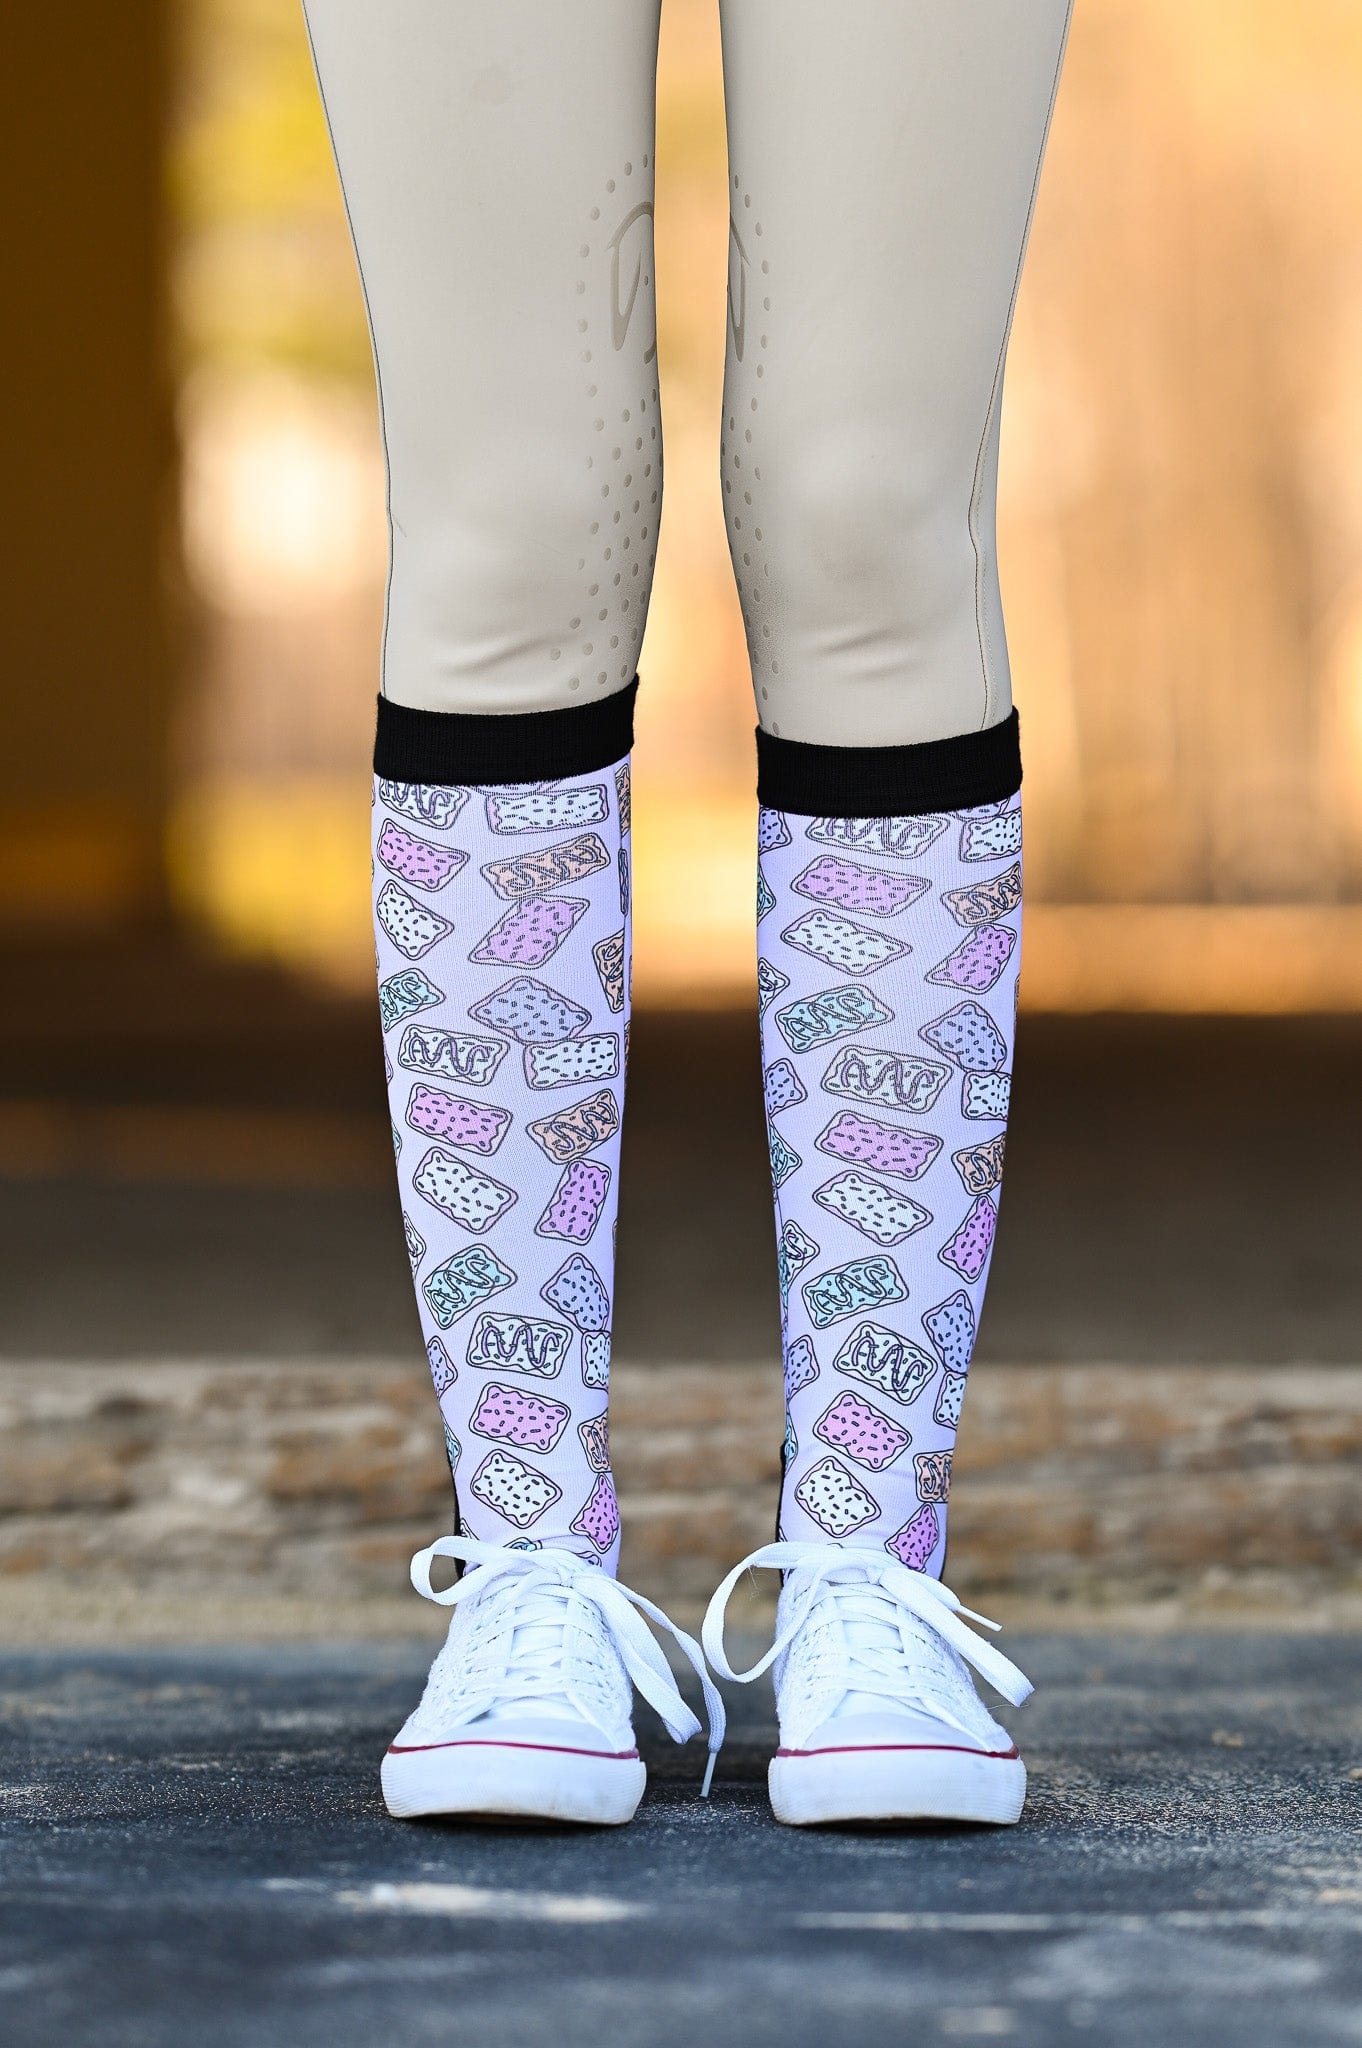 dreamers & schemers Boot Sock Dreamers & Schemers- Pop Tart equestrian team apparel online tack store mobile tack store custom farm apparel custom show stable clothing equestrian lifestyle horse show clothing riding clothes horses equestrian tack store